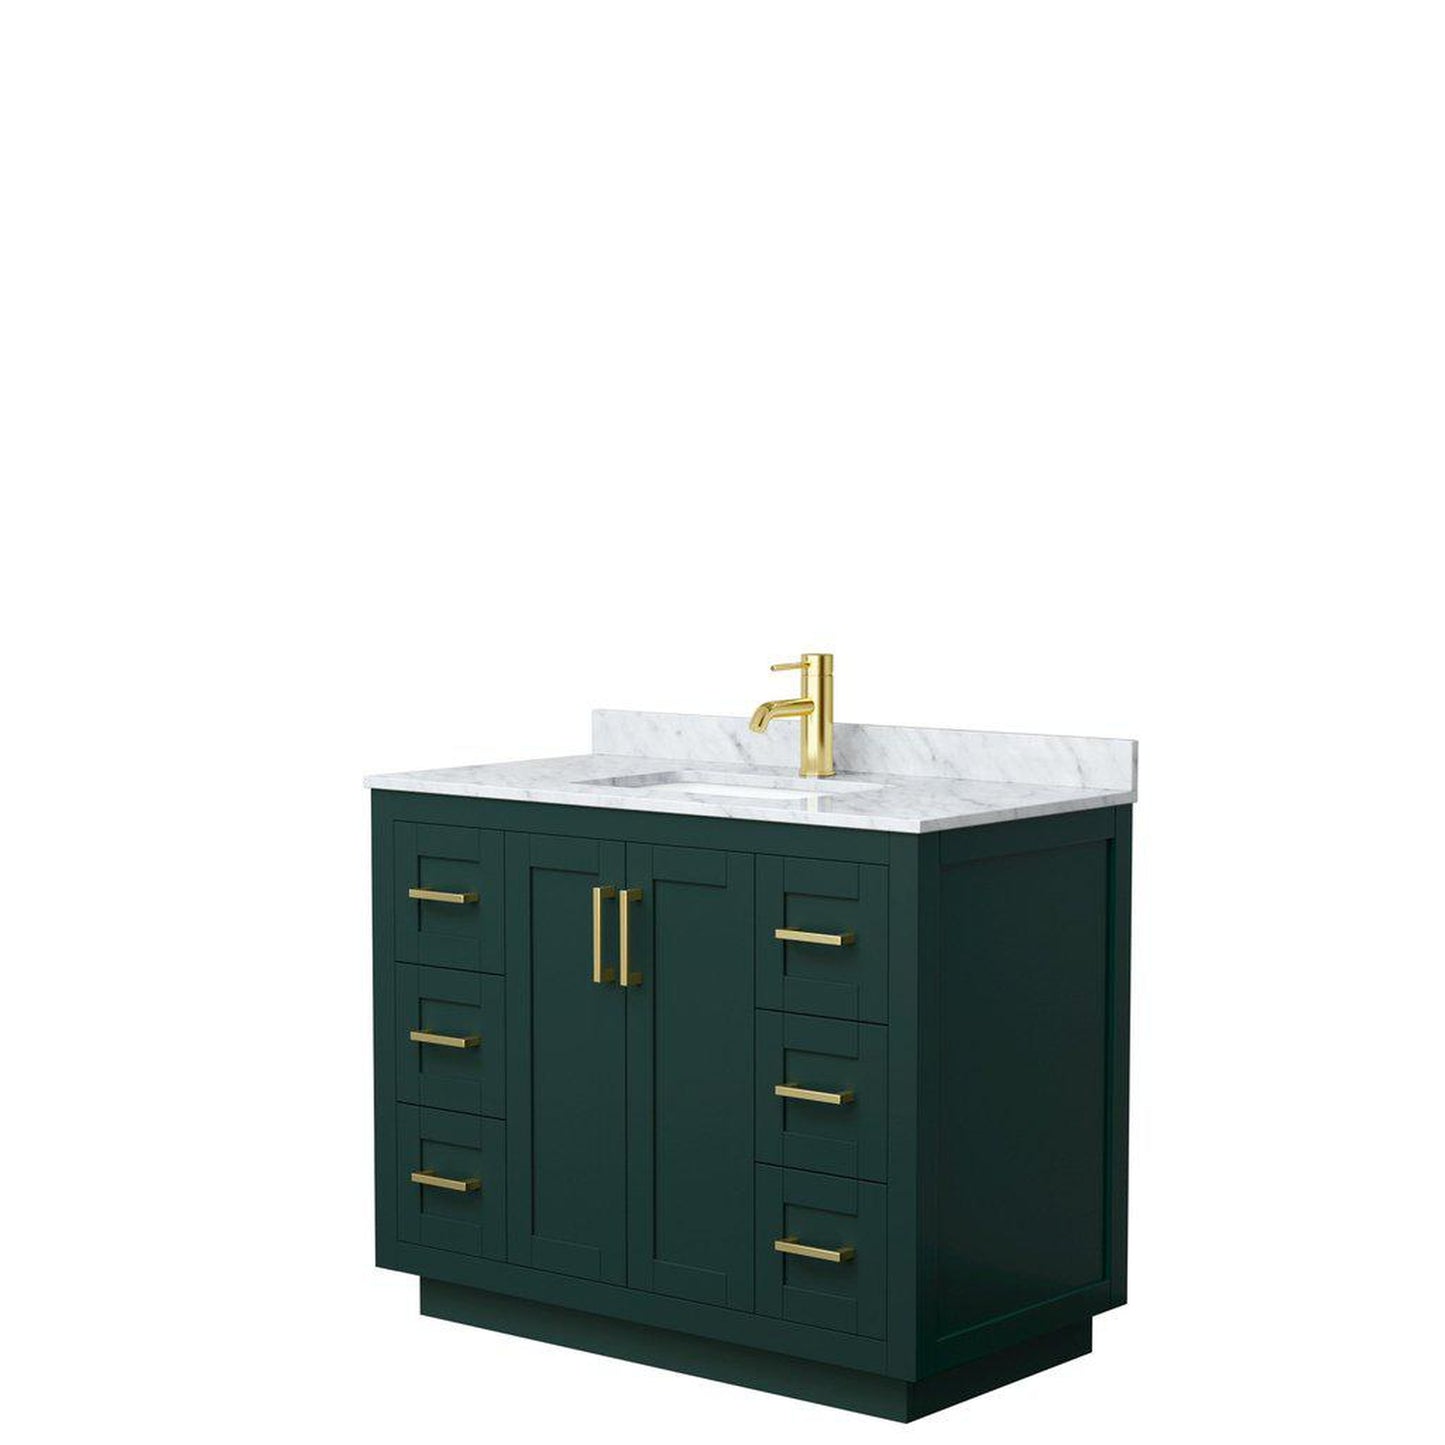 Wyndham Collection Miranda 42" Single Bathroom Green Vanity Set With White Carrara Marble Countertop, Undermount Square Sink, And Brushed Gold Trim